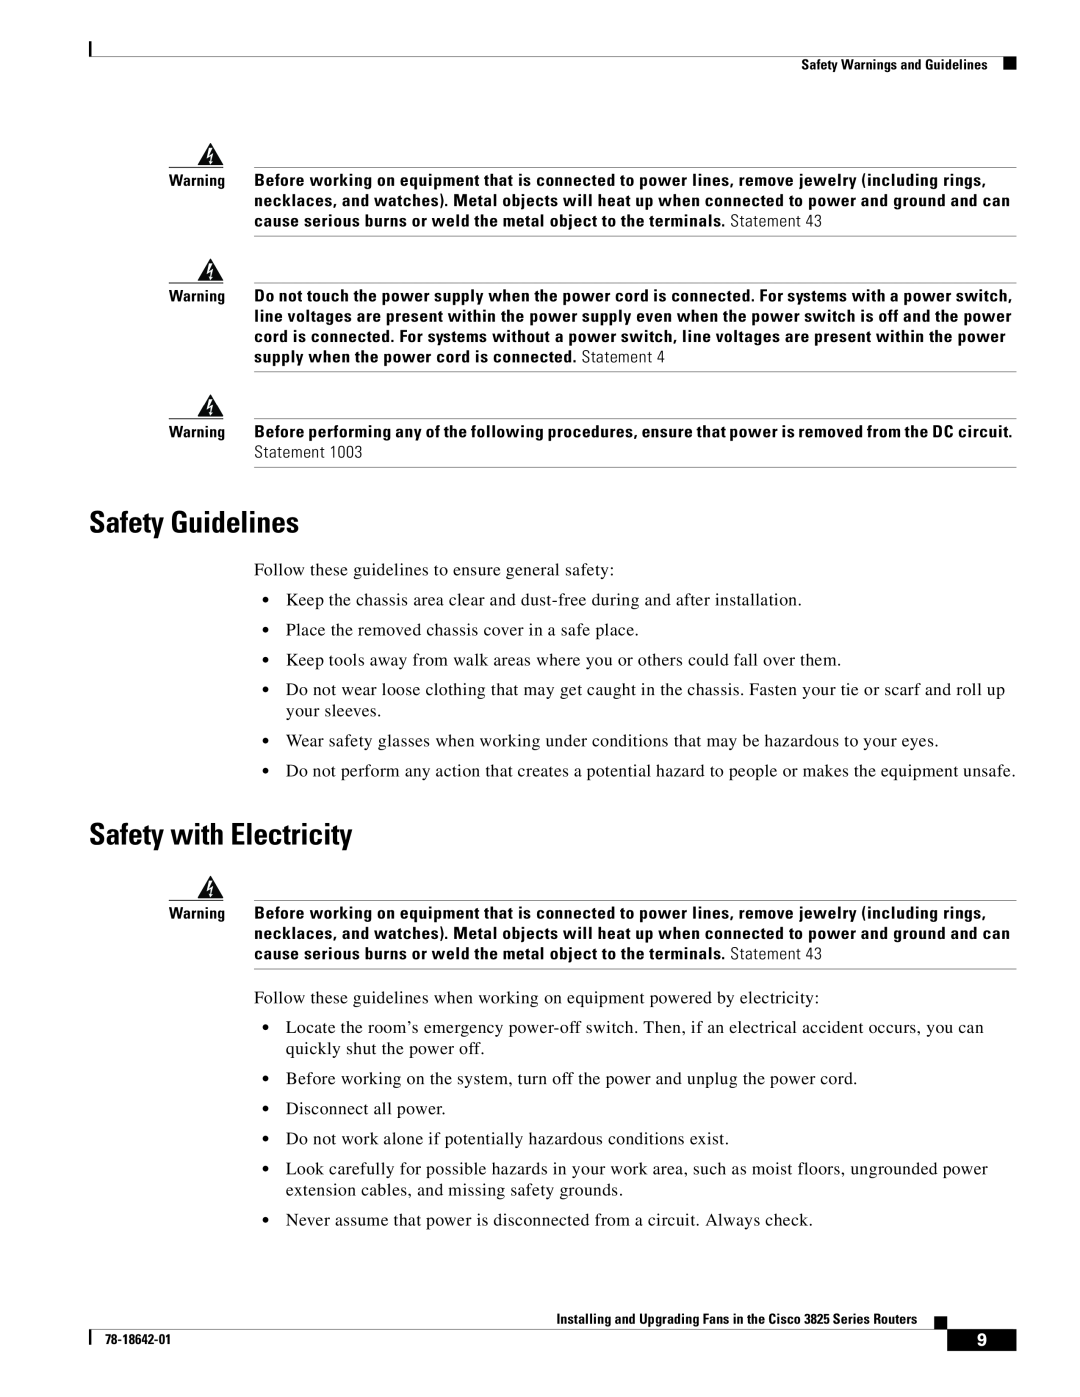 Cisco Systems 3825 Series manual Safety Guidelines, Safety with Electricity 